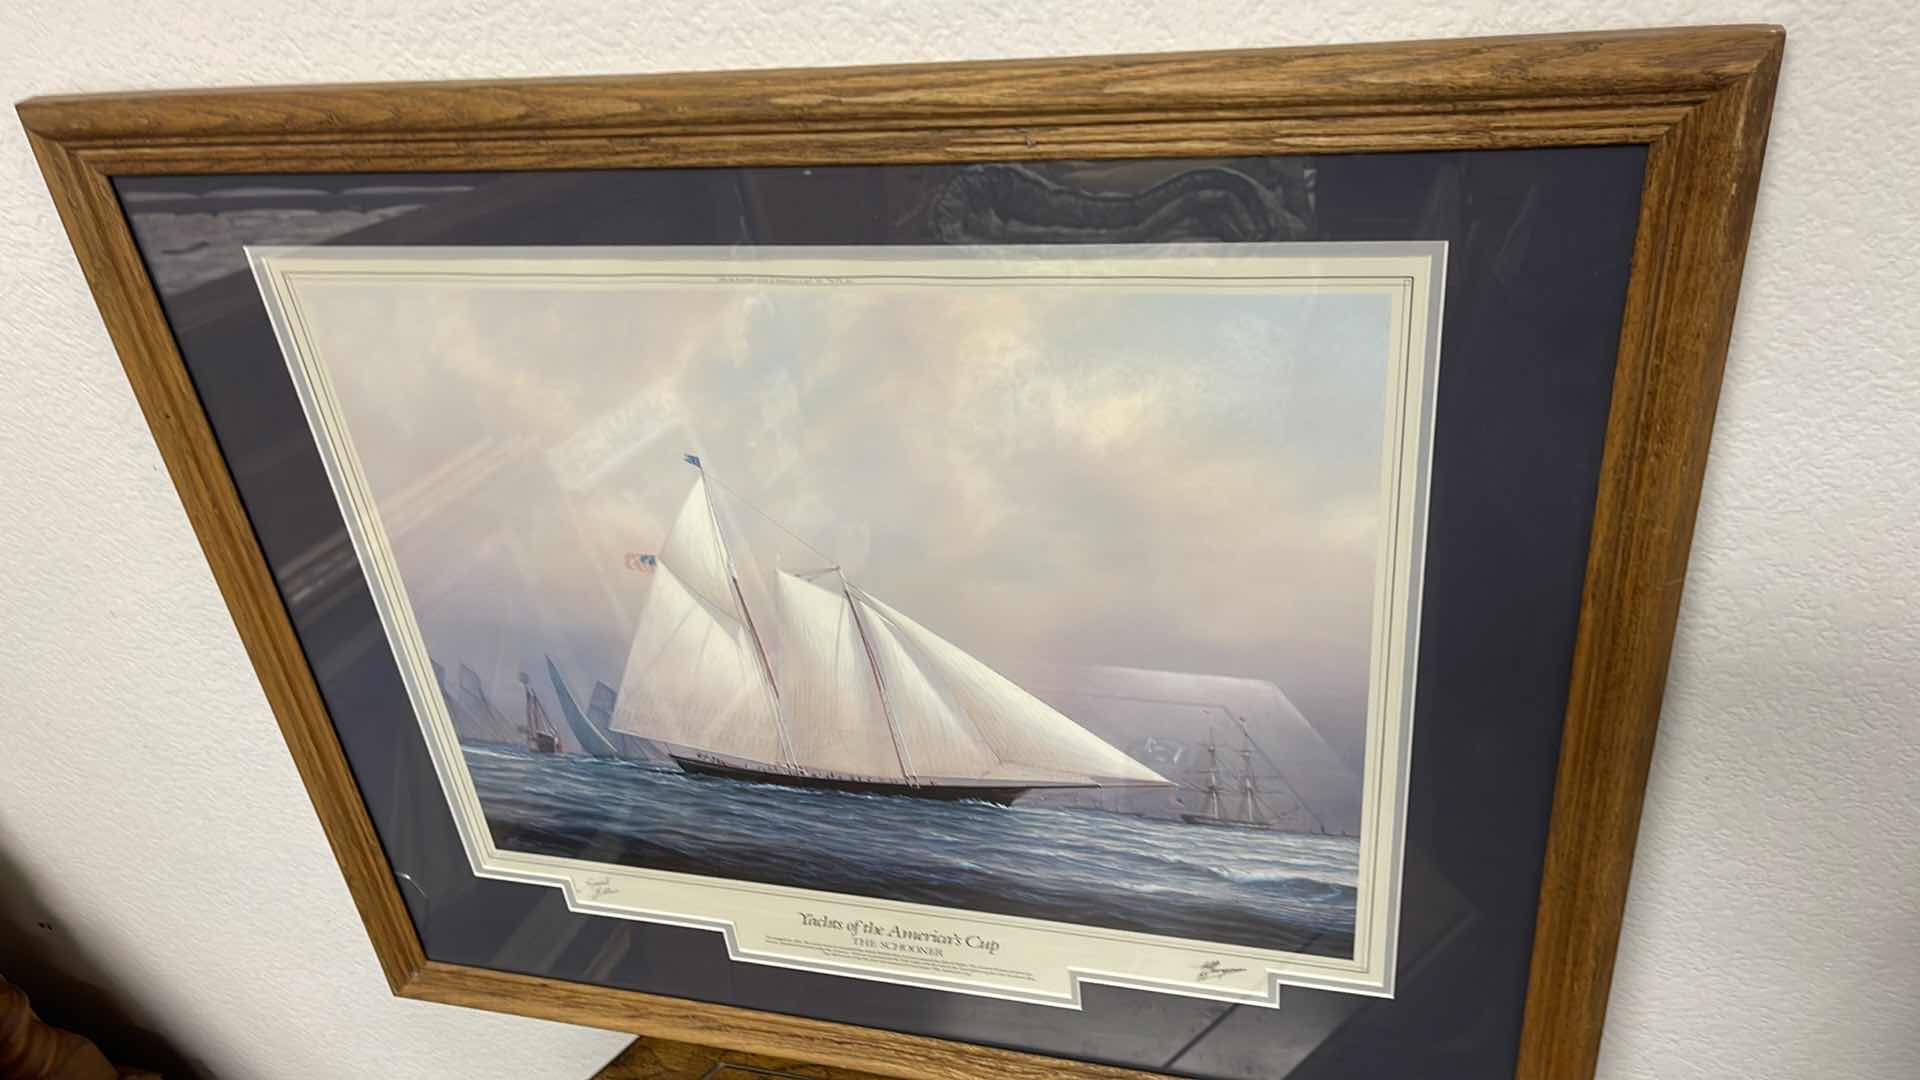 Photo 1 of WOOD FRAMED YACHTS OF THE AMERICAN CUP “THE SCHOONER” W AUTOGRAPHS 30” X 25”